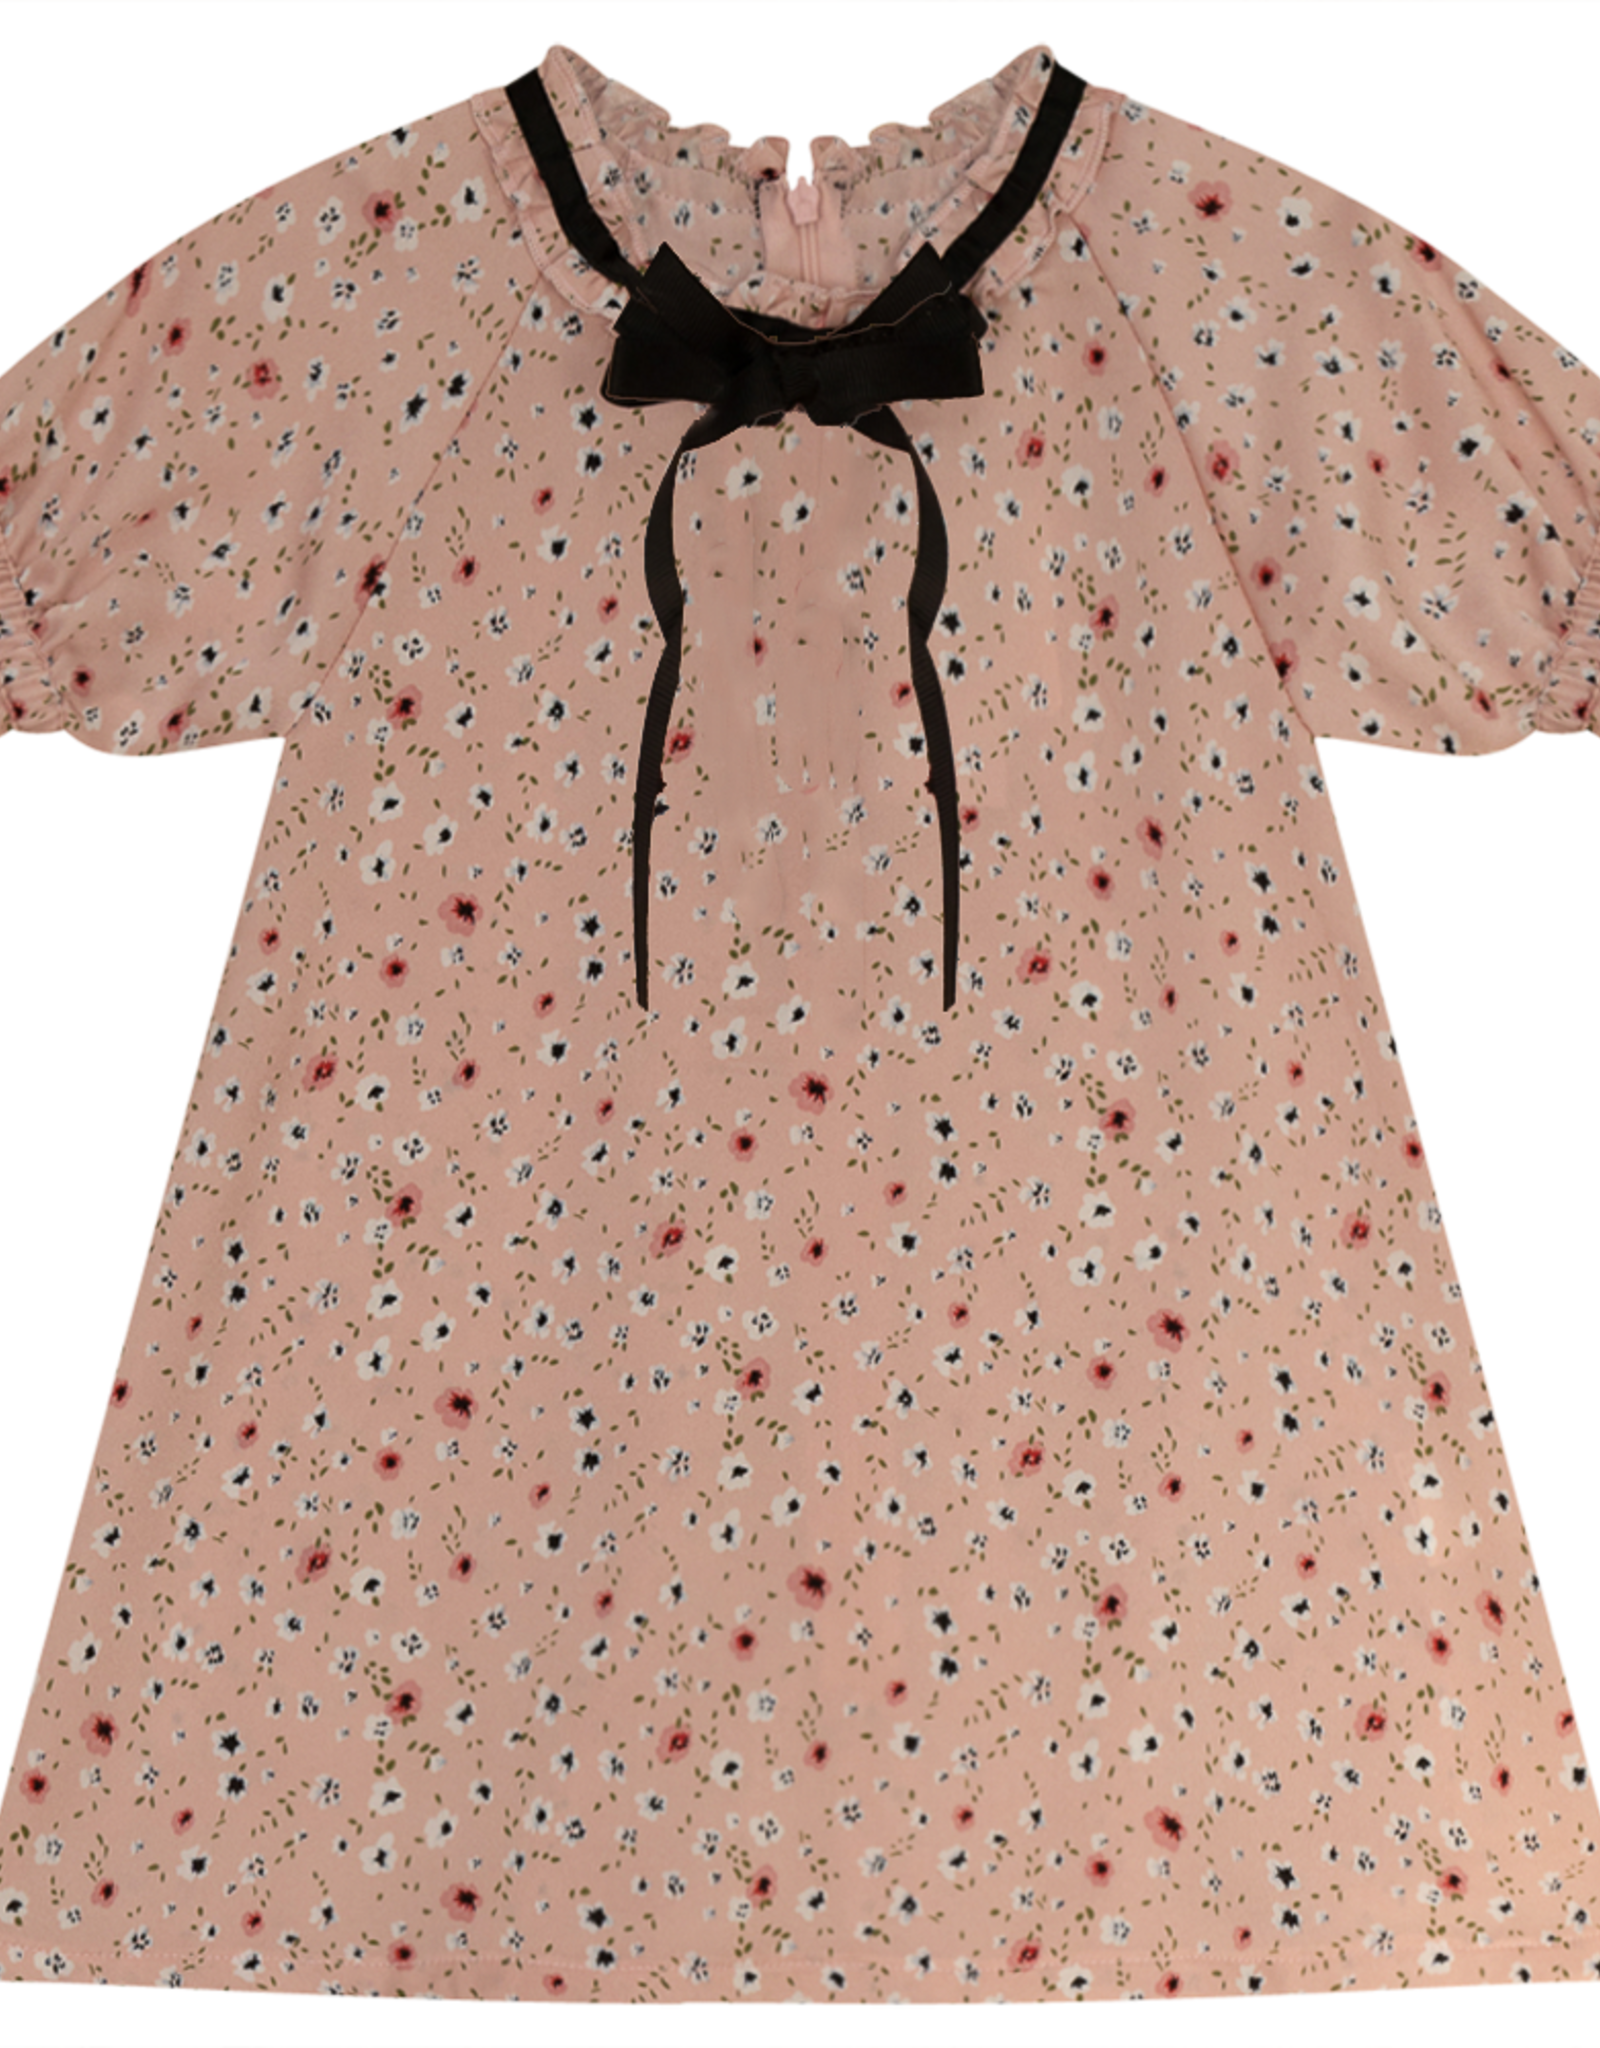 Abigail Abigail Printed Floral Dress with Bow